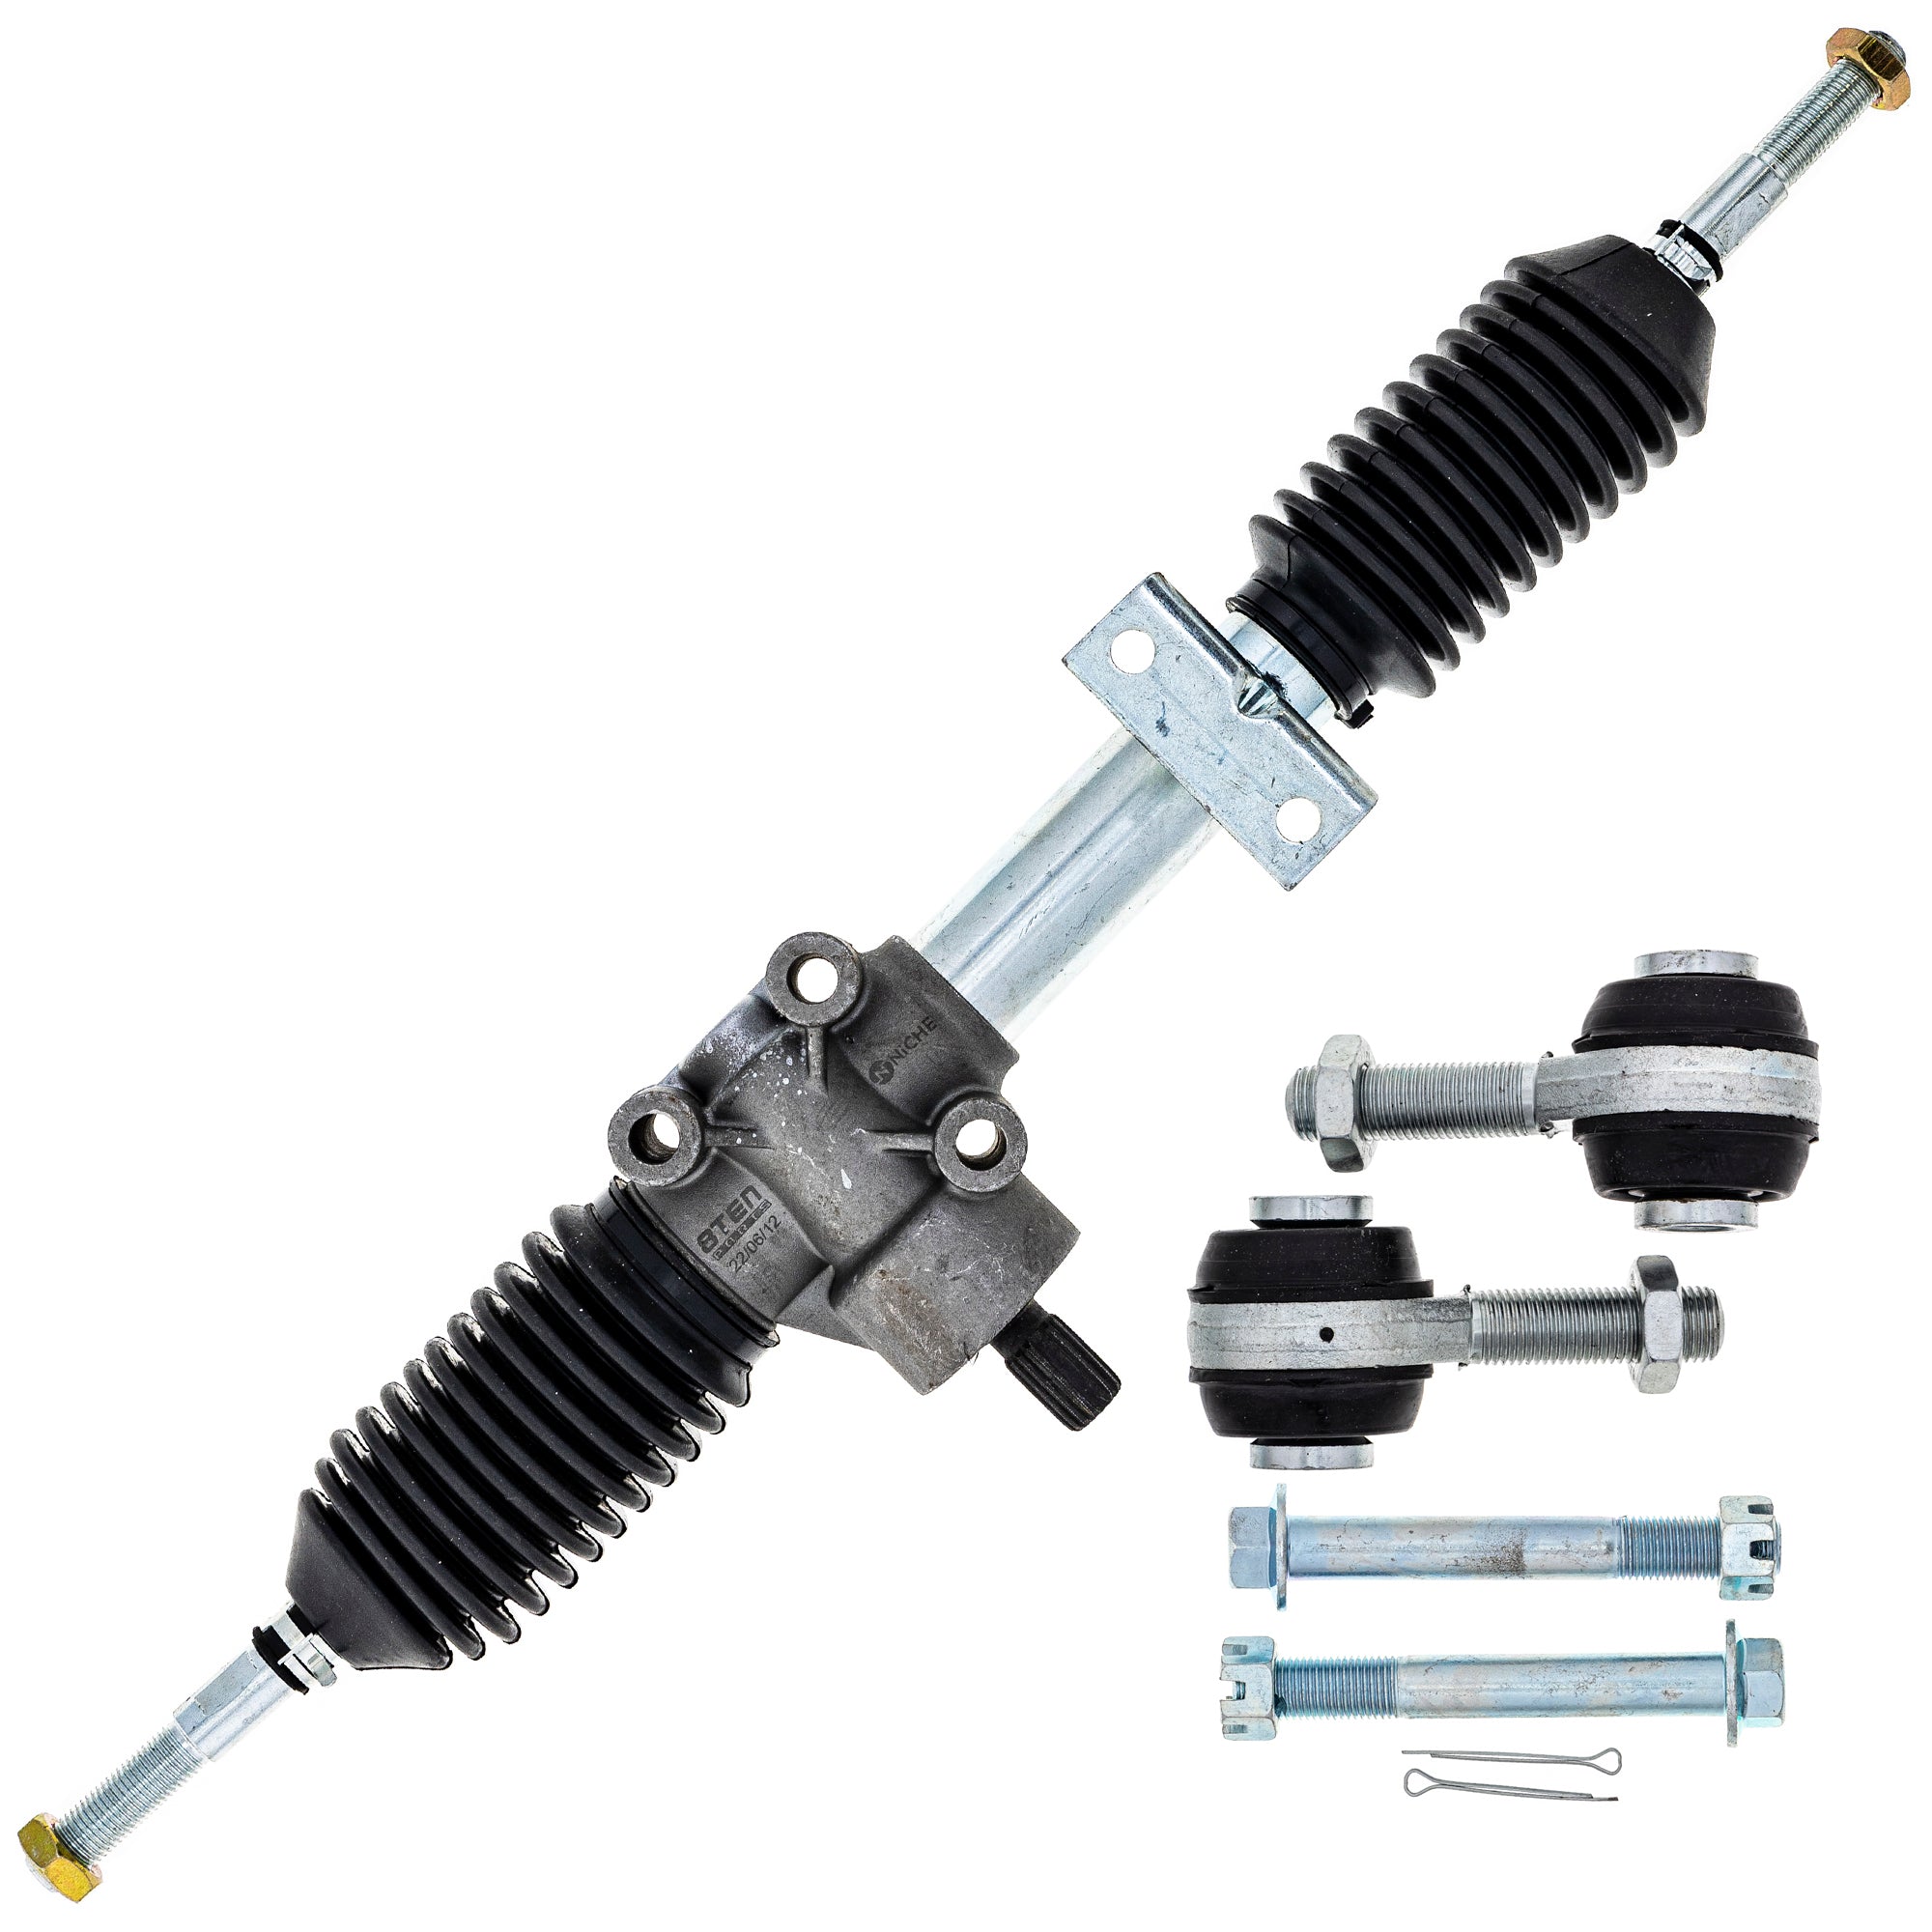 Steering Rack Assembly & Tie Rods Kit for zOTHER BRP Can-Am Ski-Doo Sea-Doo Maverick NICHE MK1009488